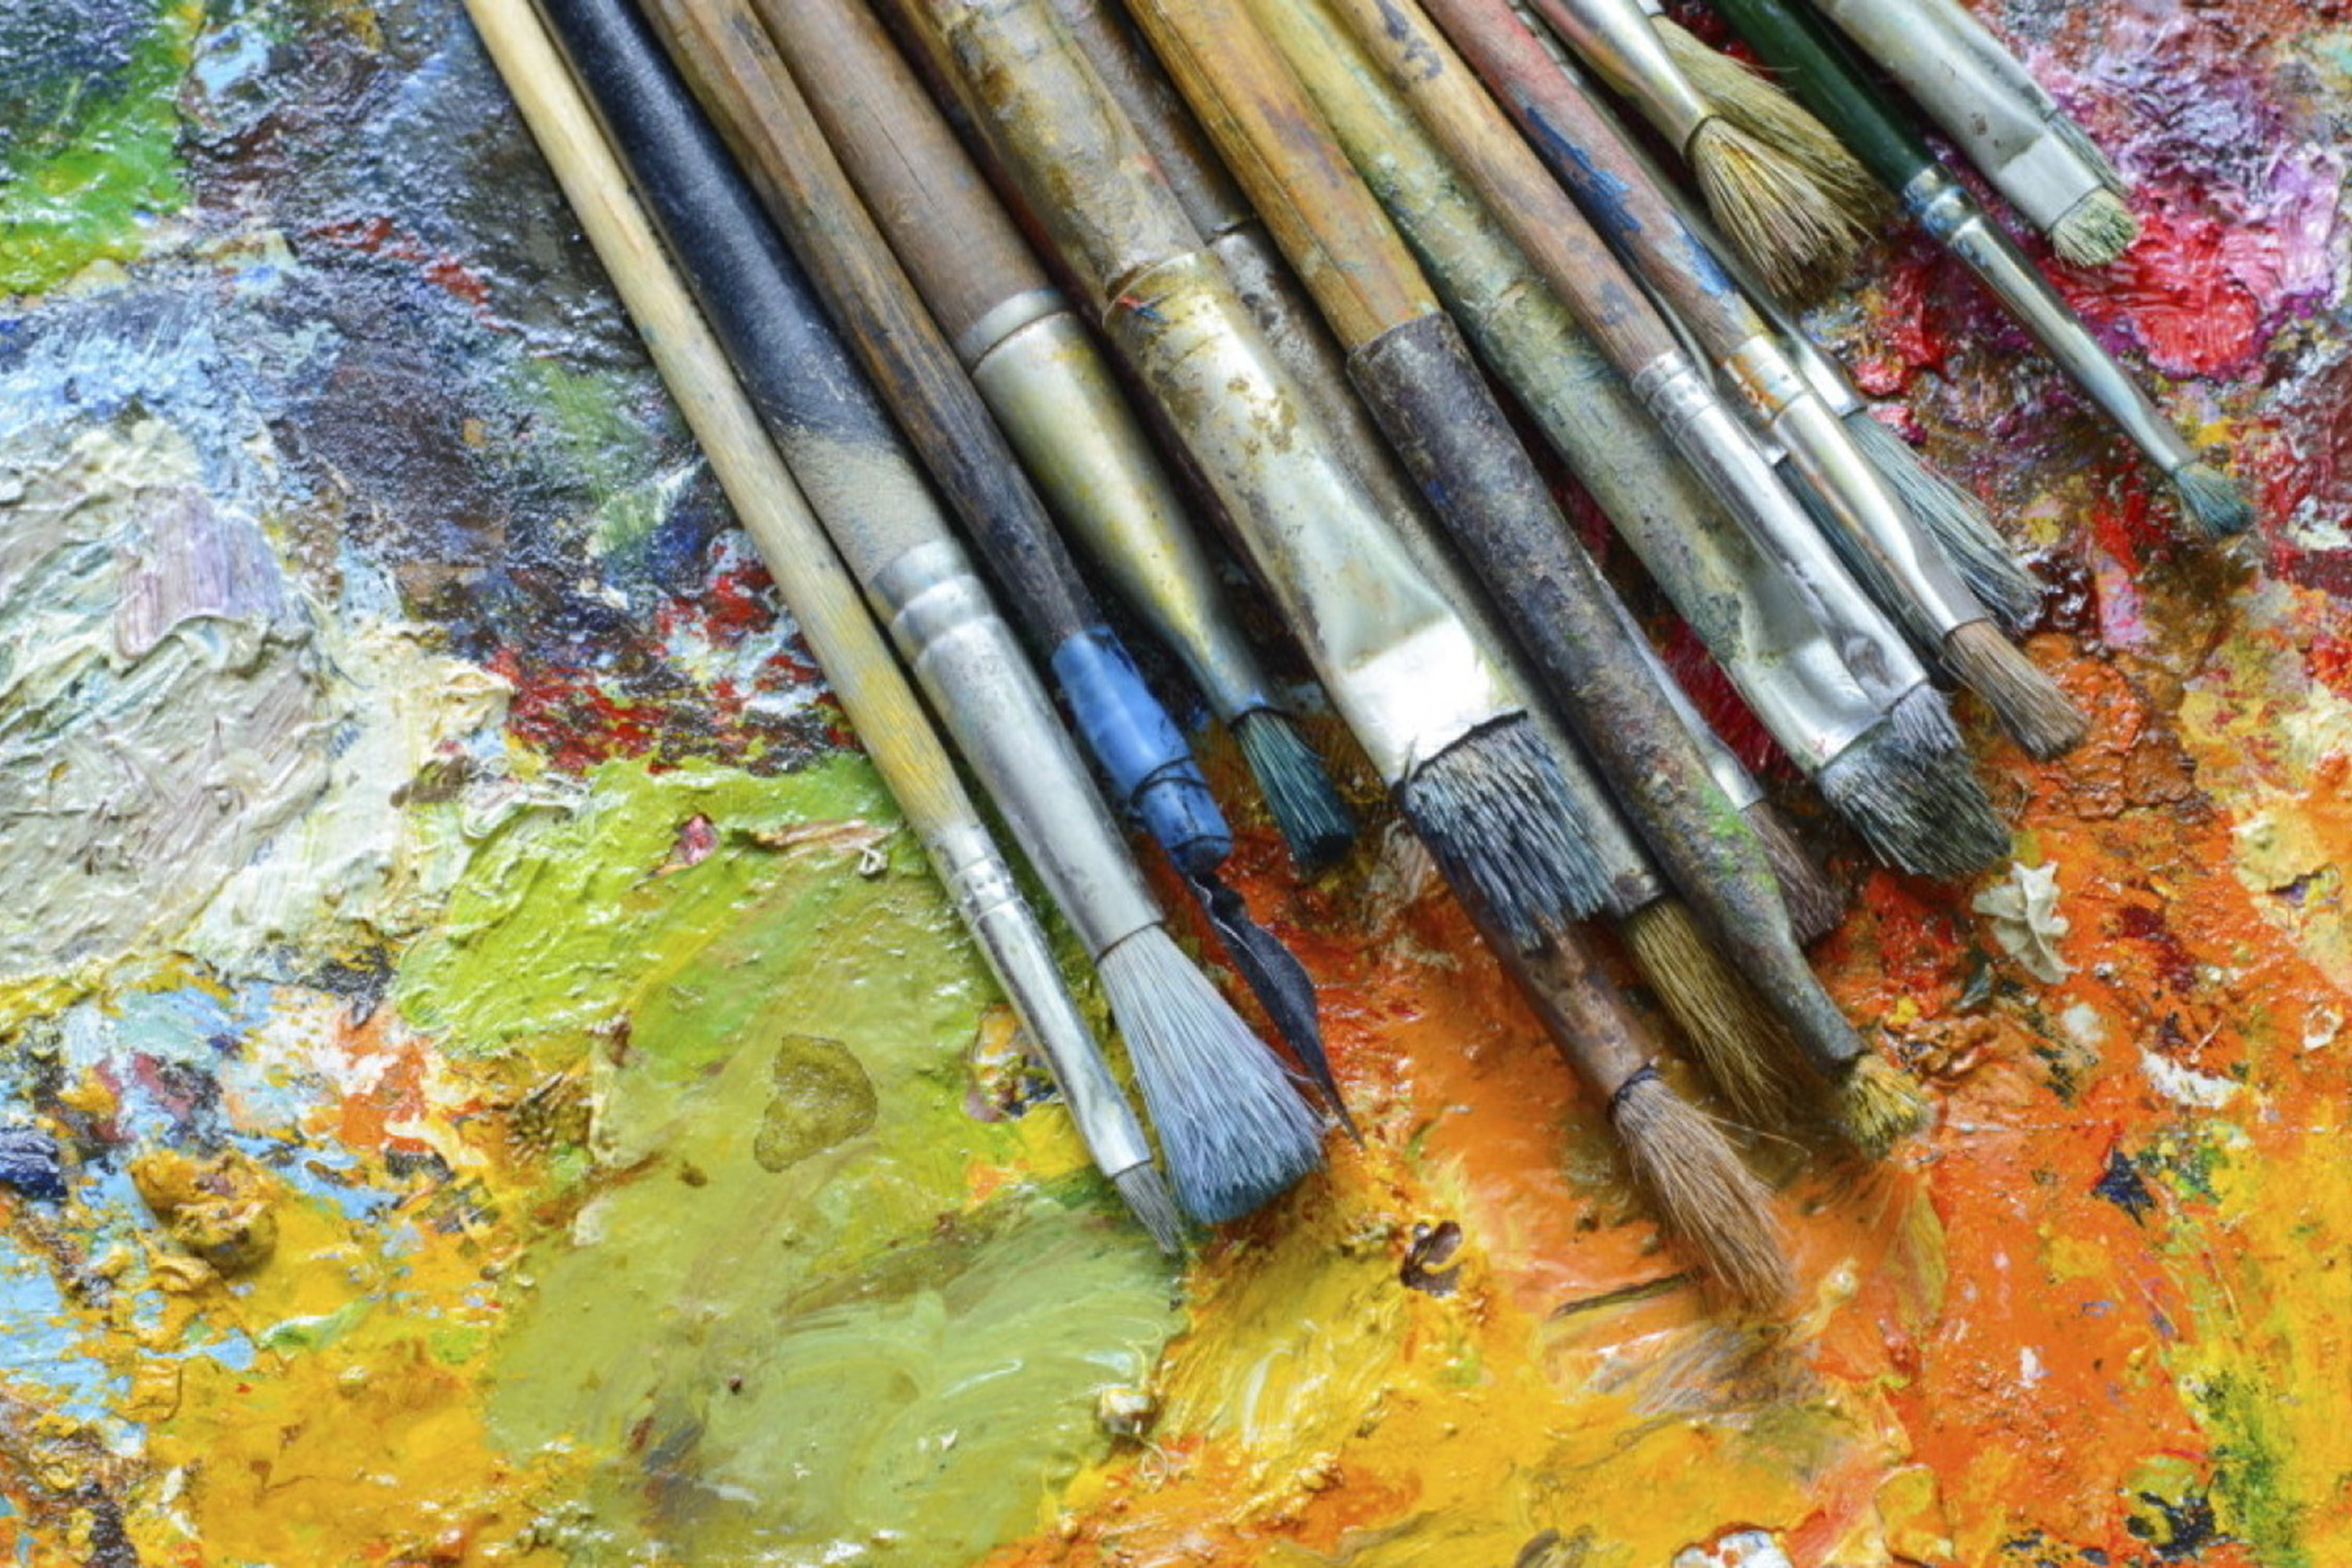  Here is a view of the brushes we supply for artists participating in Taylor Smith's art travel workshops 